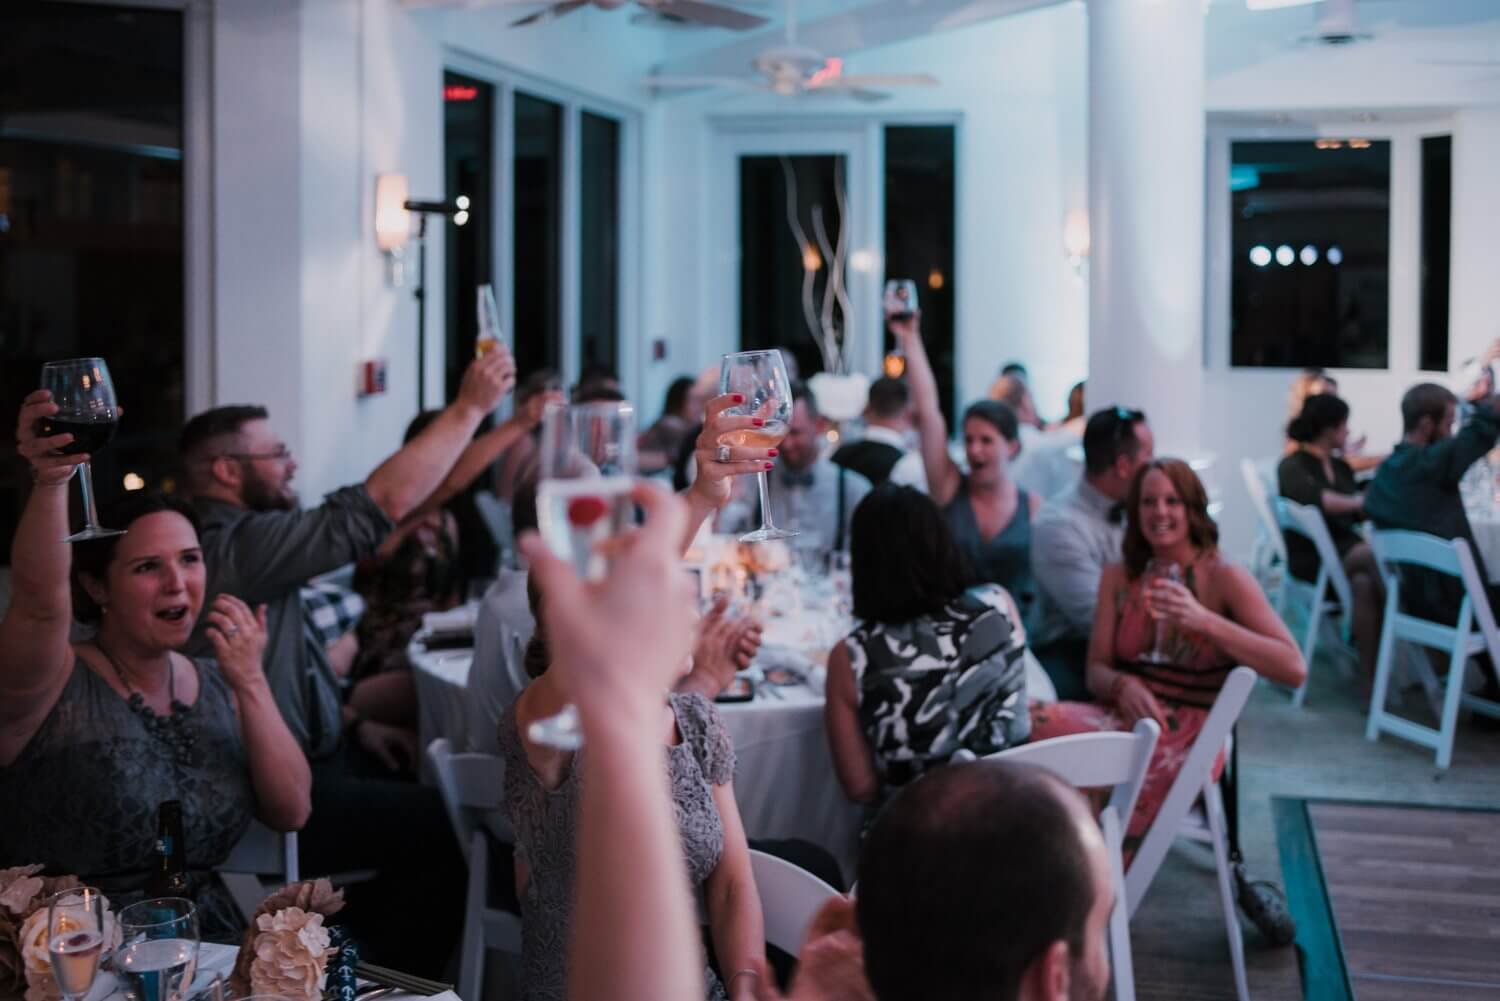 A group of people raising their glasses at a Key West wedding reception.